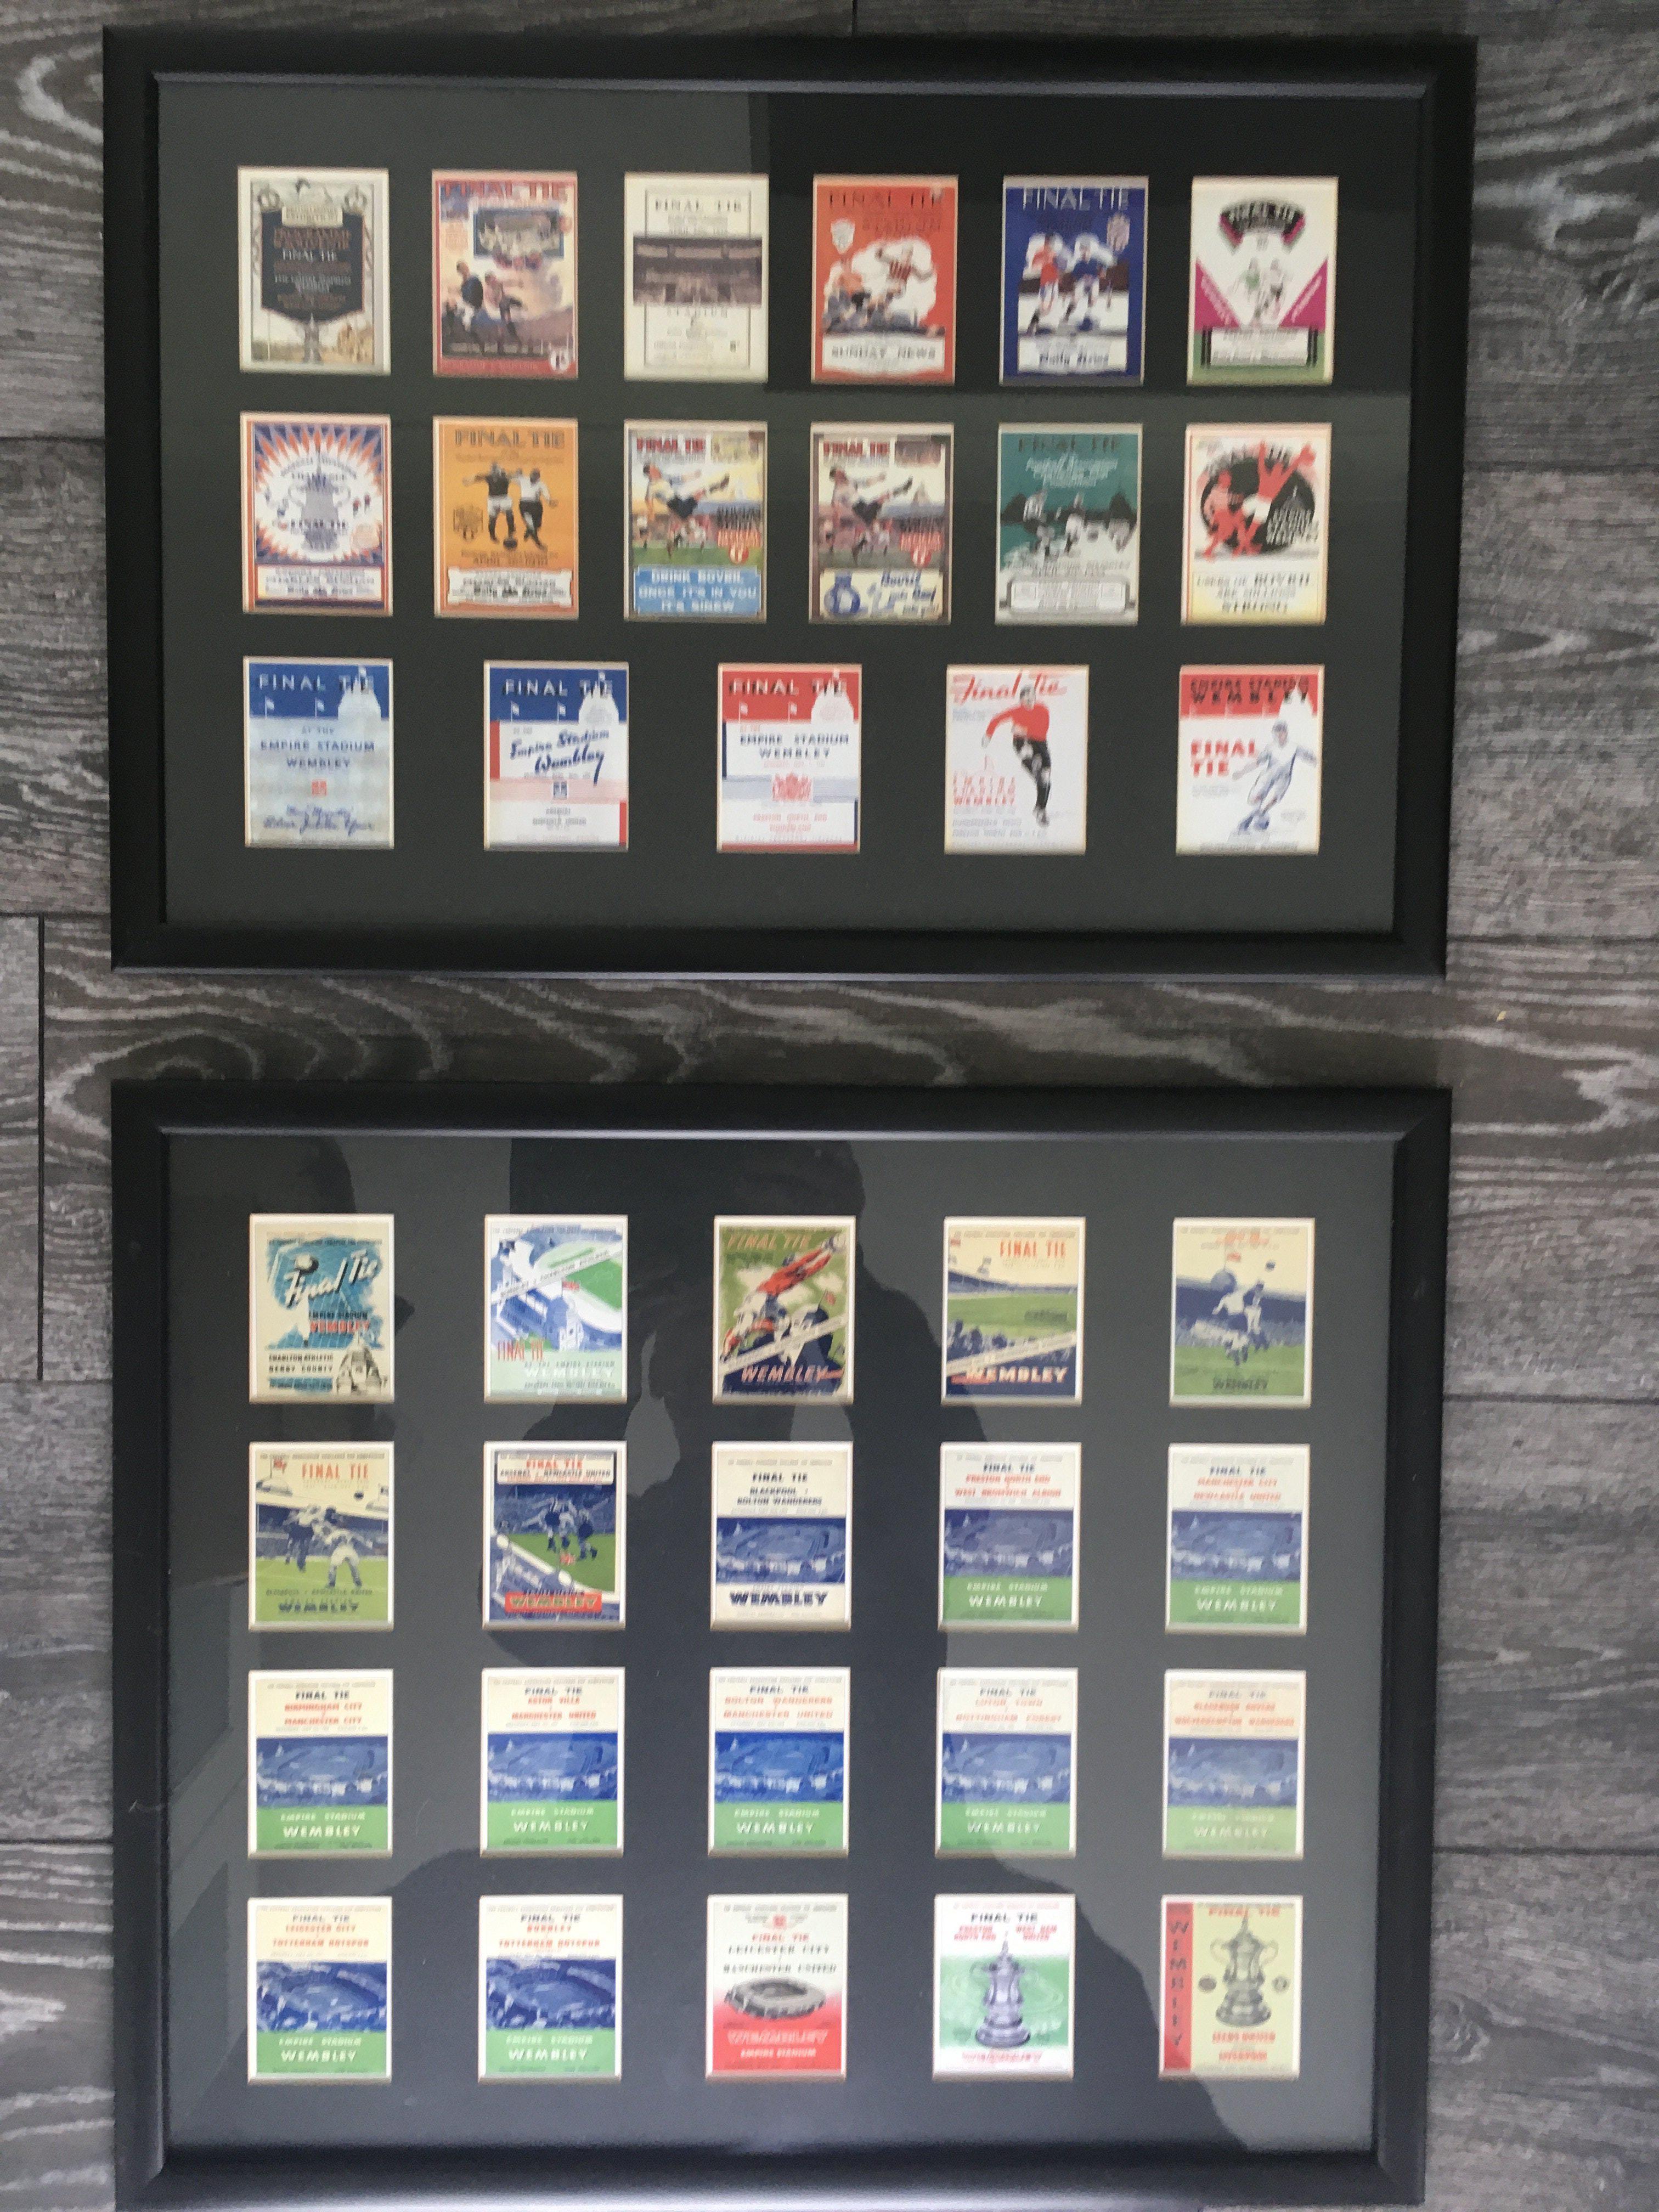 FA Cup Final Cover Football Displays: Colourful fr